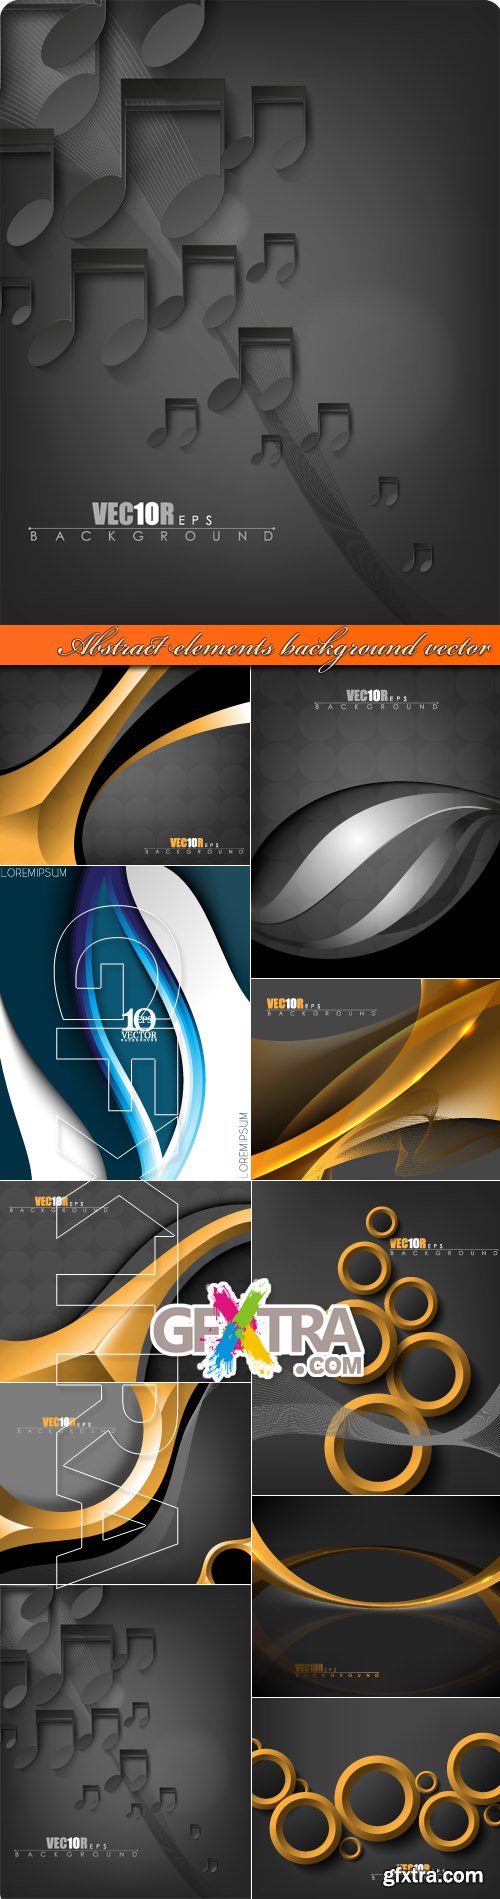 Abstract elements background vector